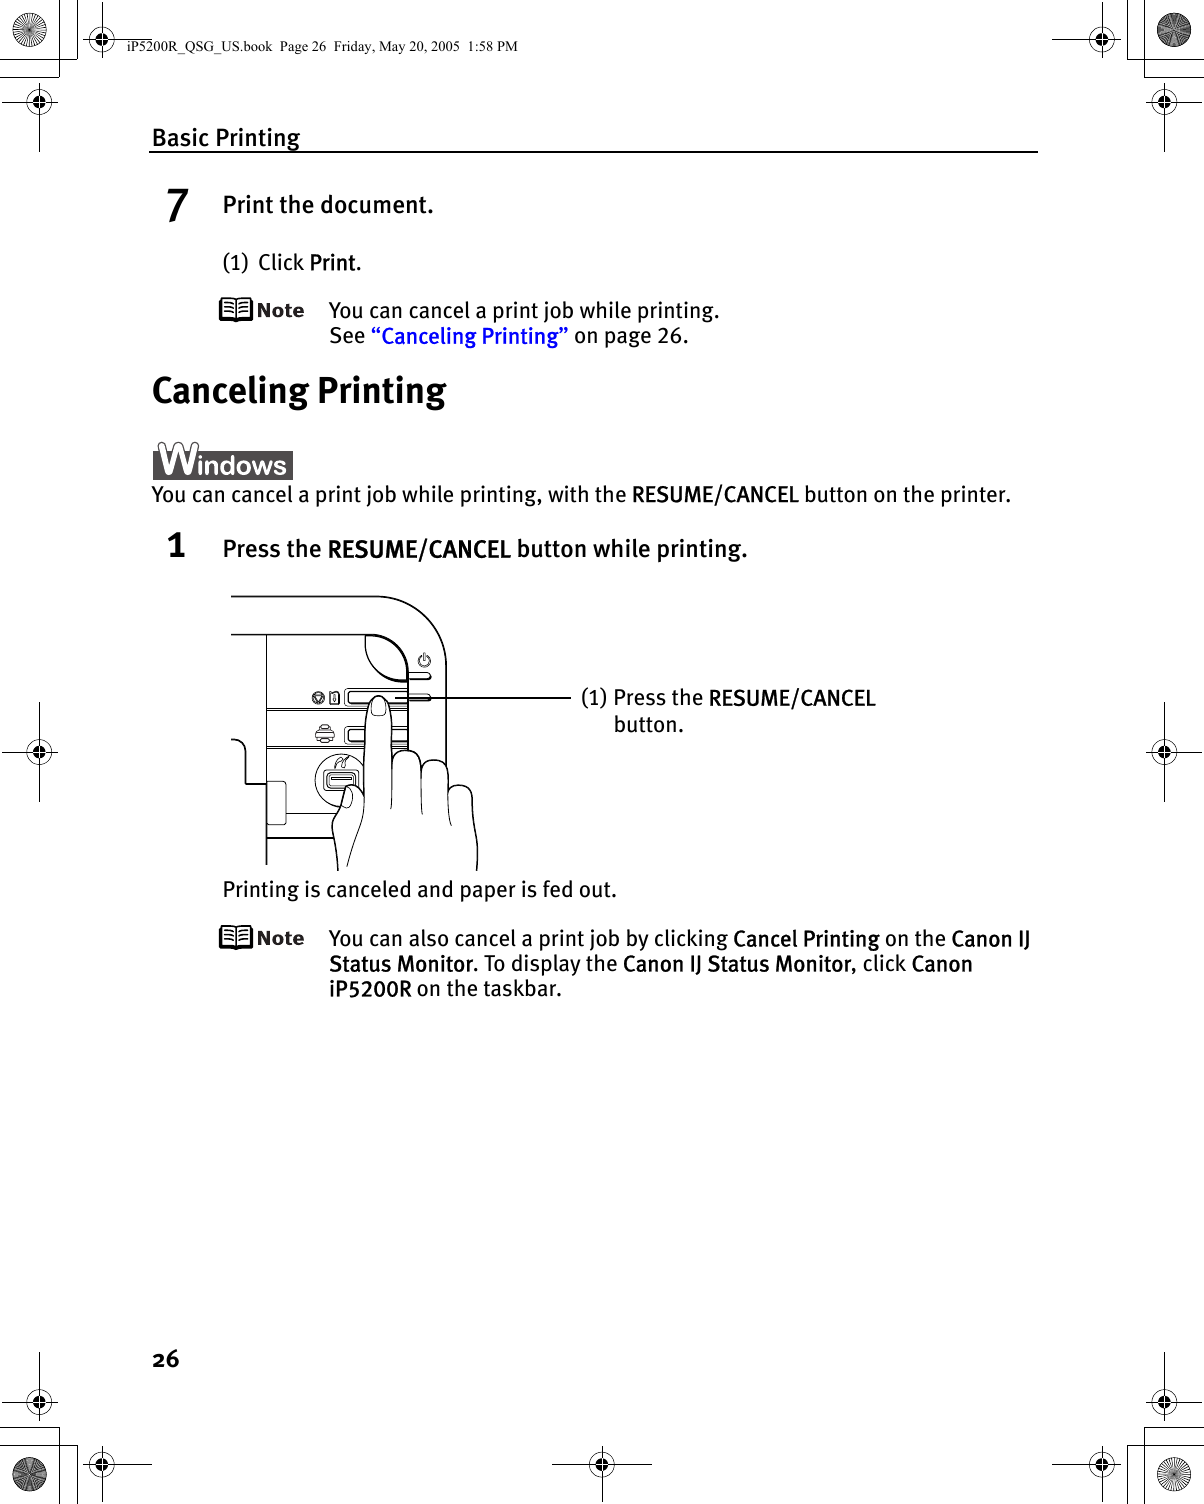 Basic Printing267Print the document.(1) Click Print.You can cancel a print job while printing.See “Canceling Printing” on page 26.Canceling PrintingYou can cancel a print job while printing, with the RESUME/CANCEL button on the printer.1Press the RESUME/CANCEL button while printing.Printing is canceled and paper is fed out.You can also cancel a print job by clicking Cancel Printing on the Canon IJ Status Monitor. To display the Canon IJ Status Monitor, click Canon iP5200R on the taskbar.(1) Press the RESUME/CANCEL button.iP5200R_QSG_US.book  Page 26  Friday, May 20, 2005  1:58 PM